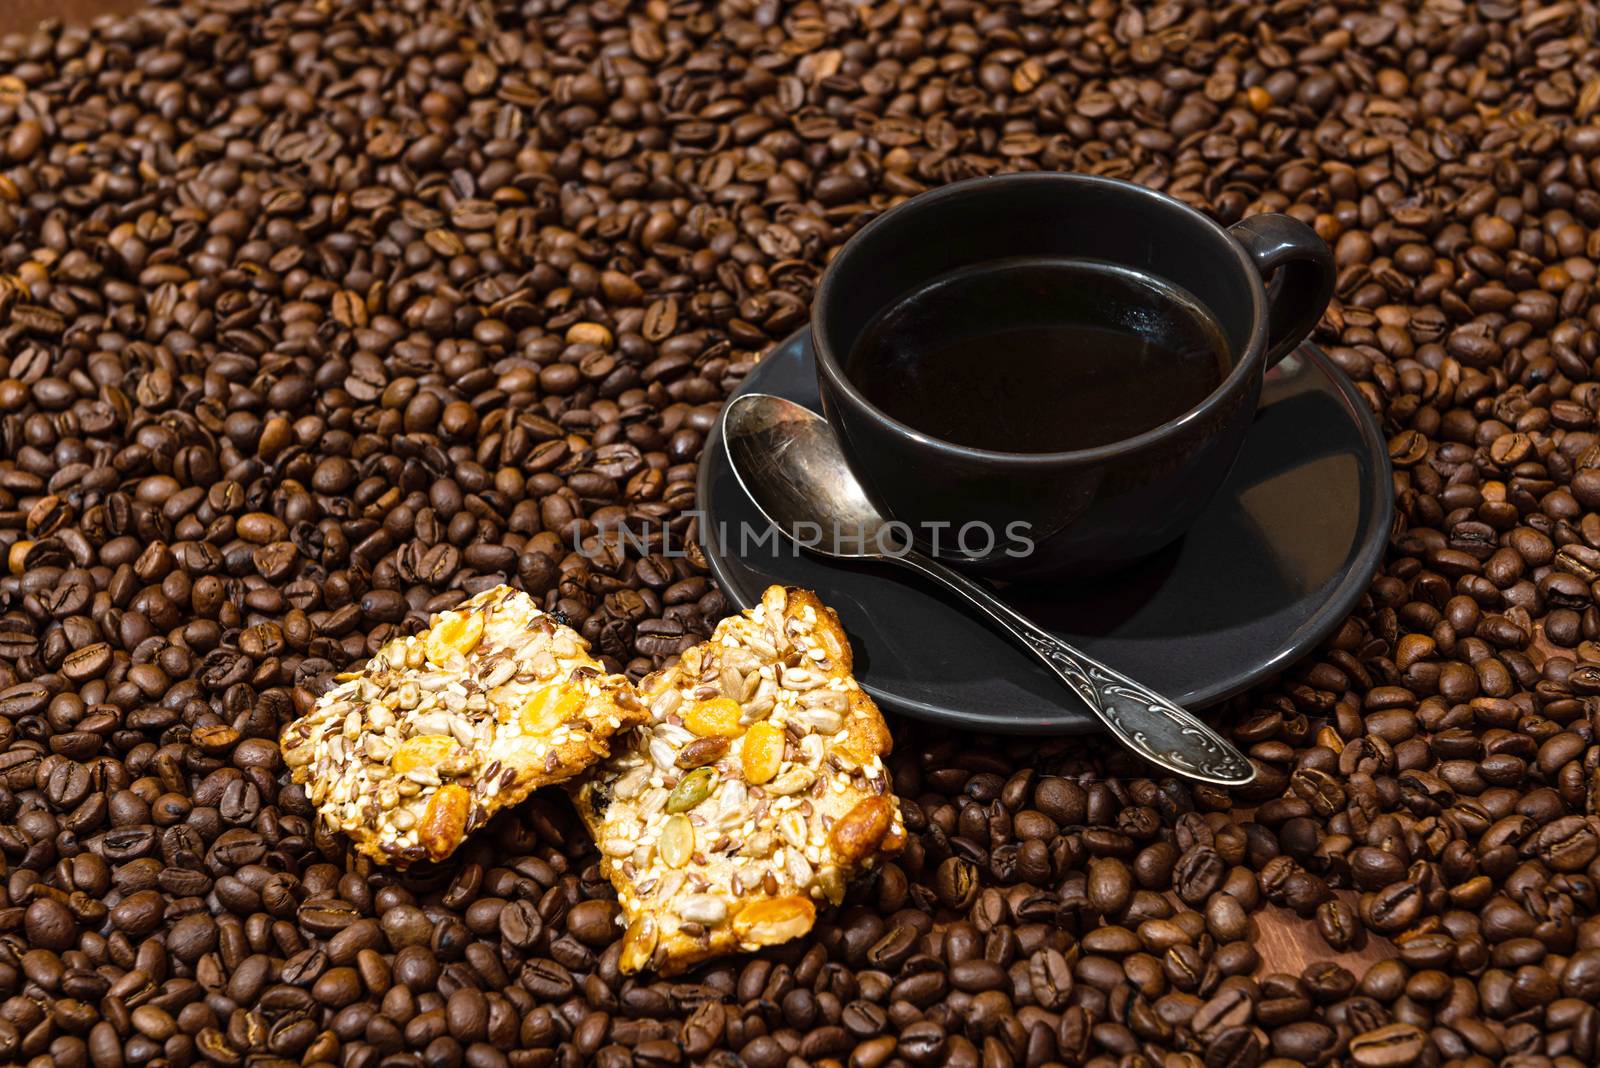 Black coffee mug and cookies on the coffee beans background - image